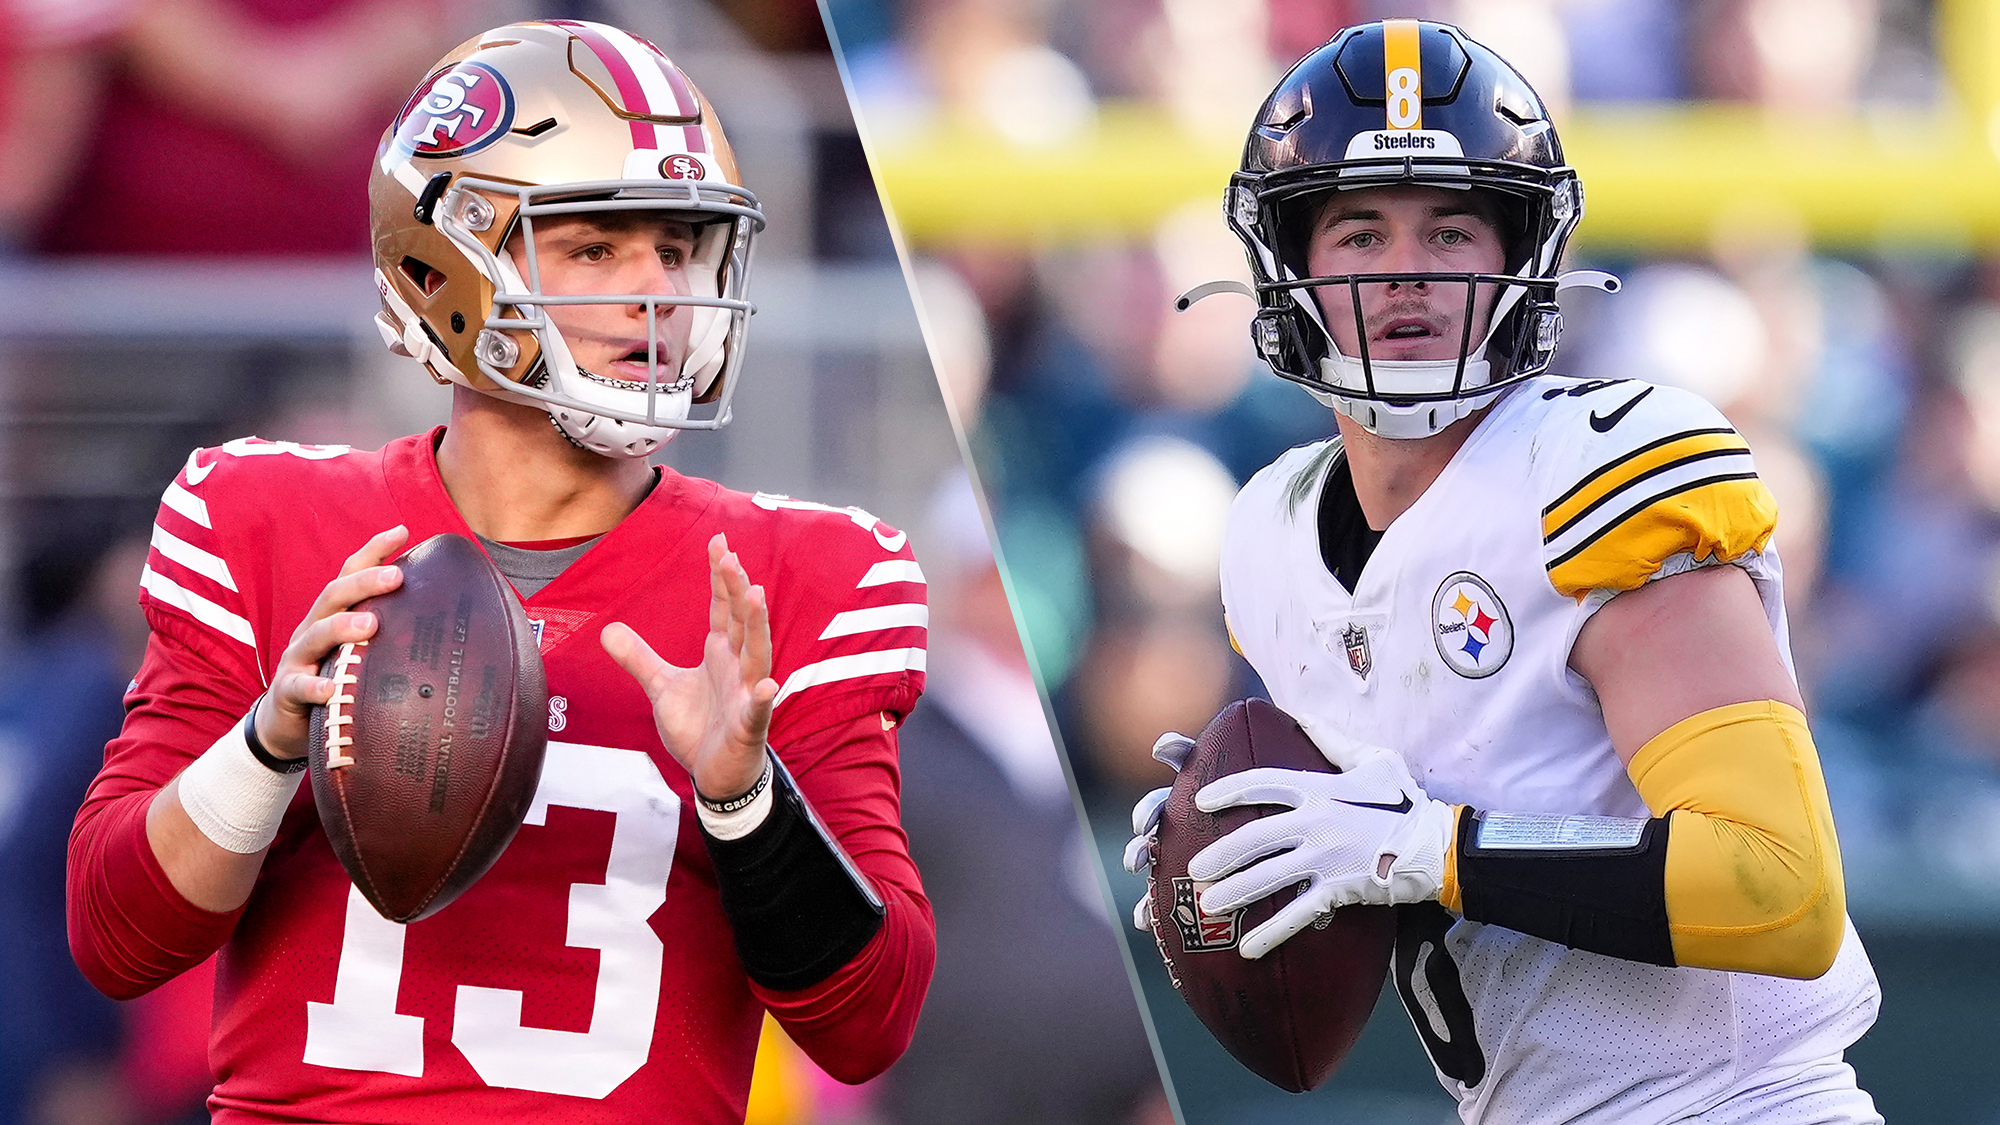 49ers vs. Steelers Livestream: How to Watch NFL Week 1 Online Today - CNET